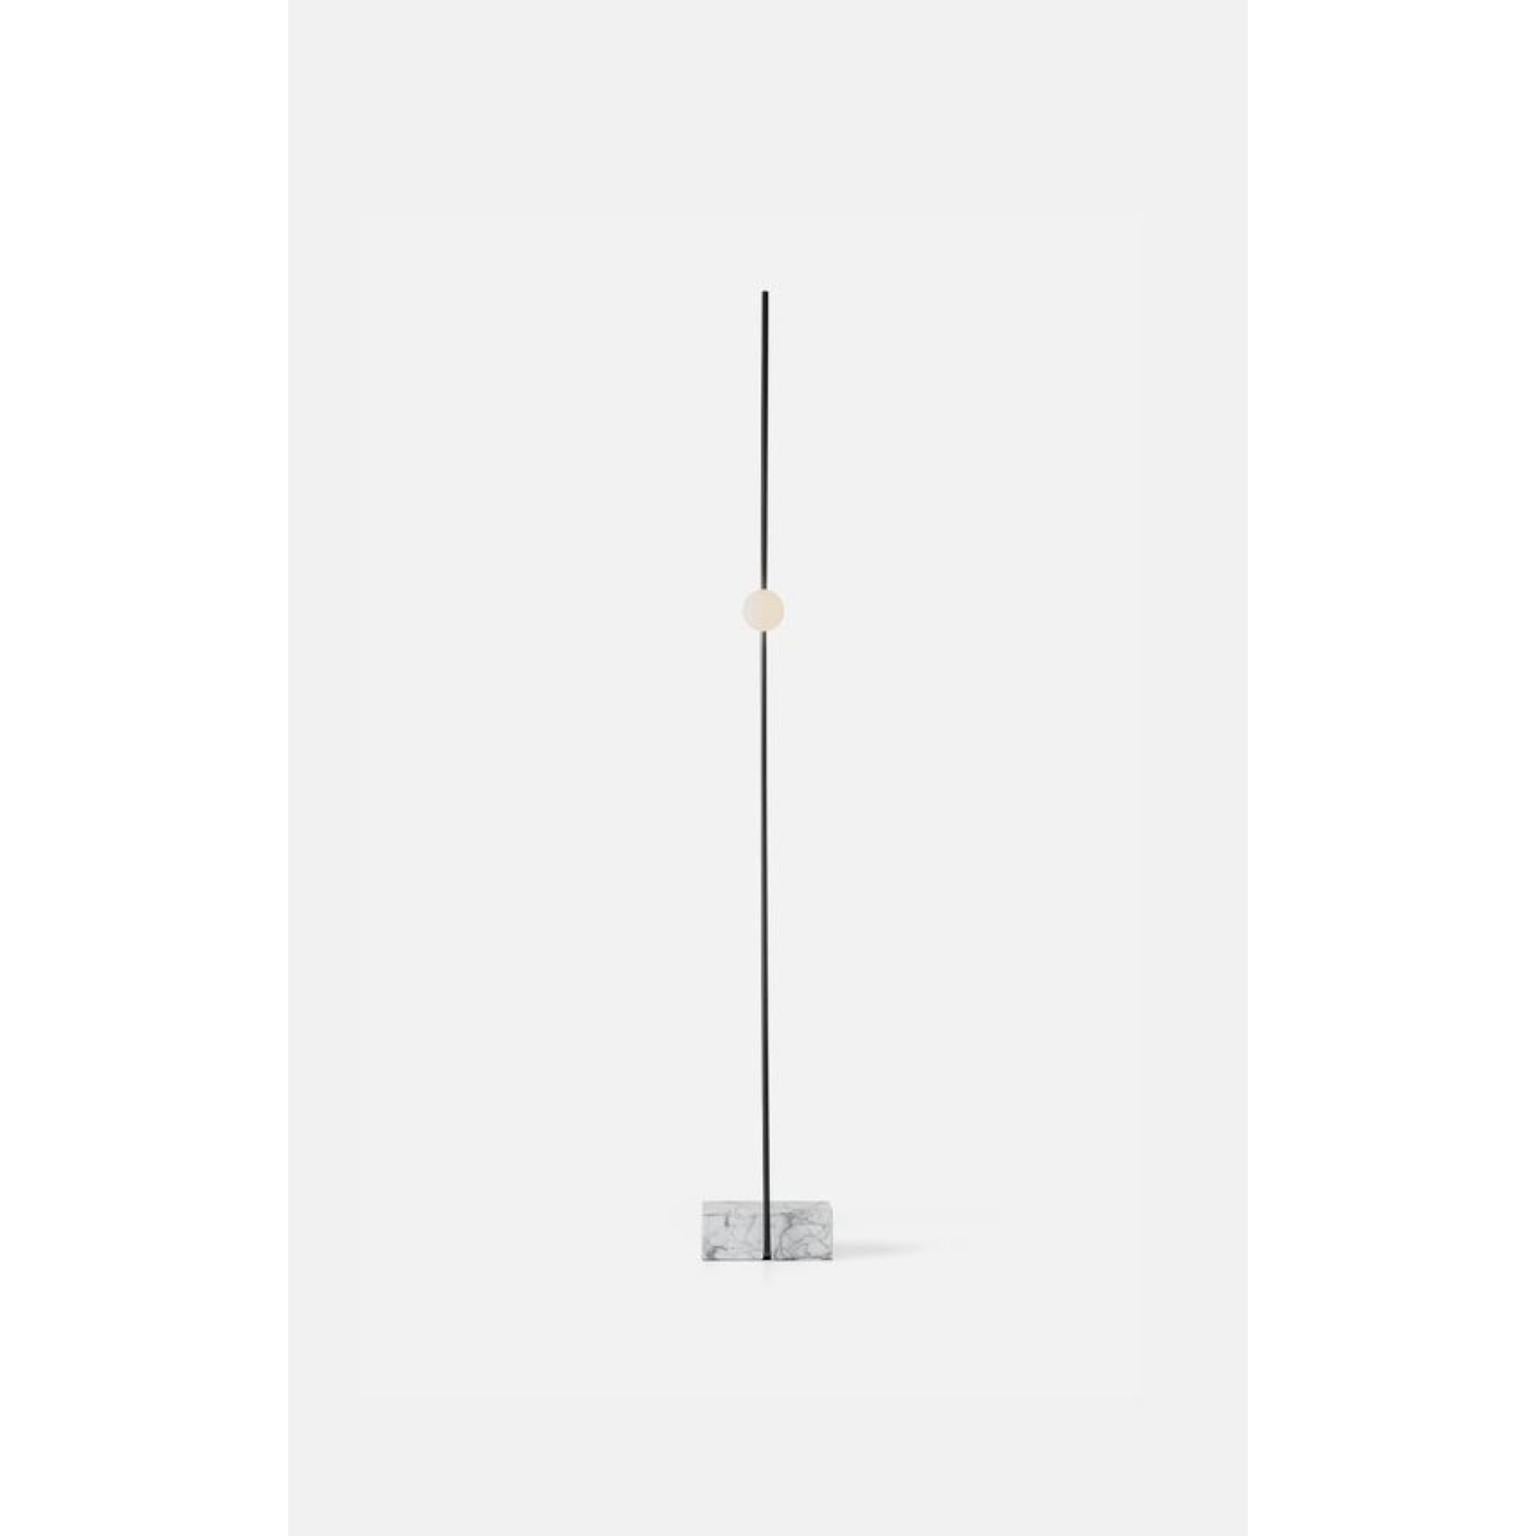 Black Adobe Floor Lamp by Wentz
Dimensions: D 32 x W 24 x H 180 cm
Materials: Steel, Marble, Blown Glass.
Also available in different colors: Black + Carrara Marble, White + Carrara Marble, Sand + Bege Bahia Marble.

Weight: 8,6kg / 19 lbs
LIGHT